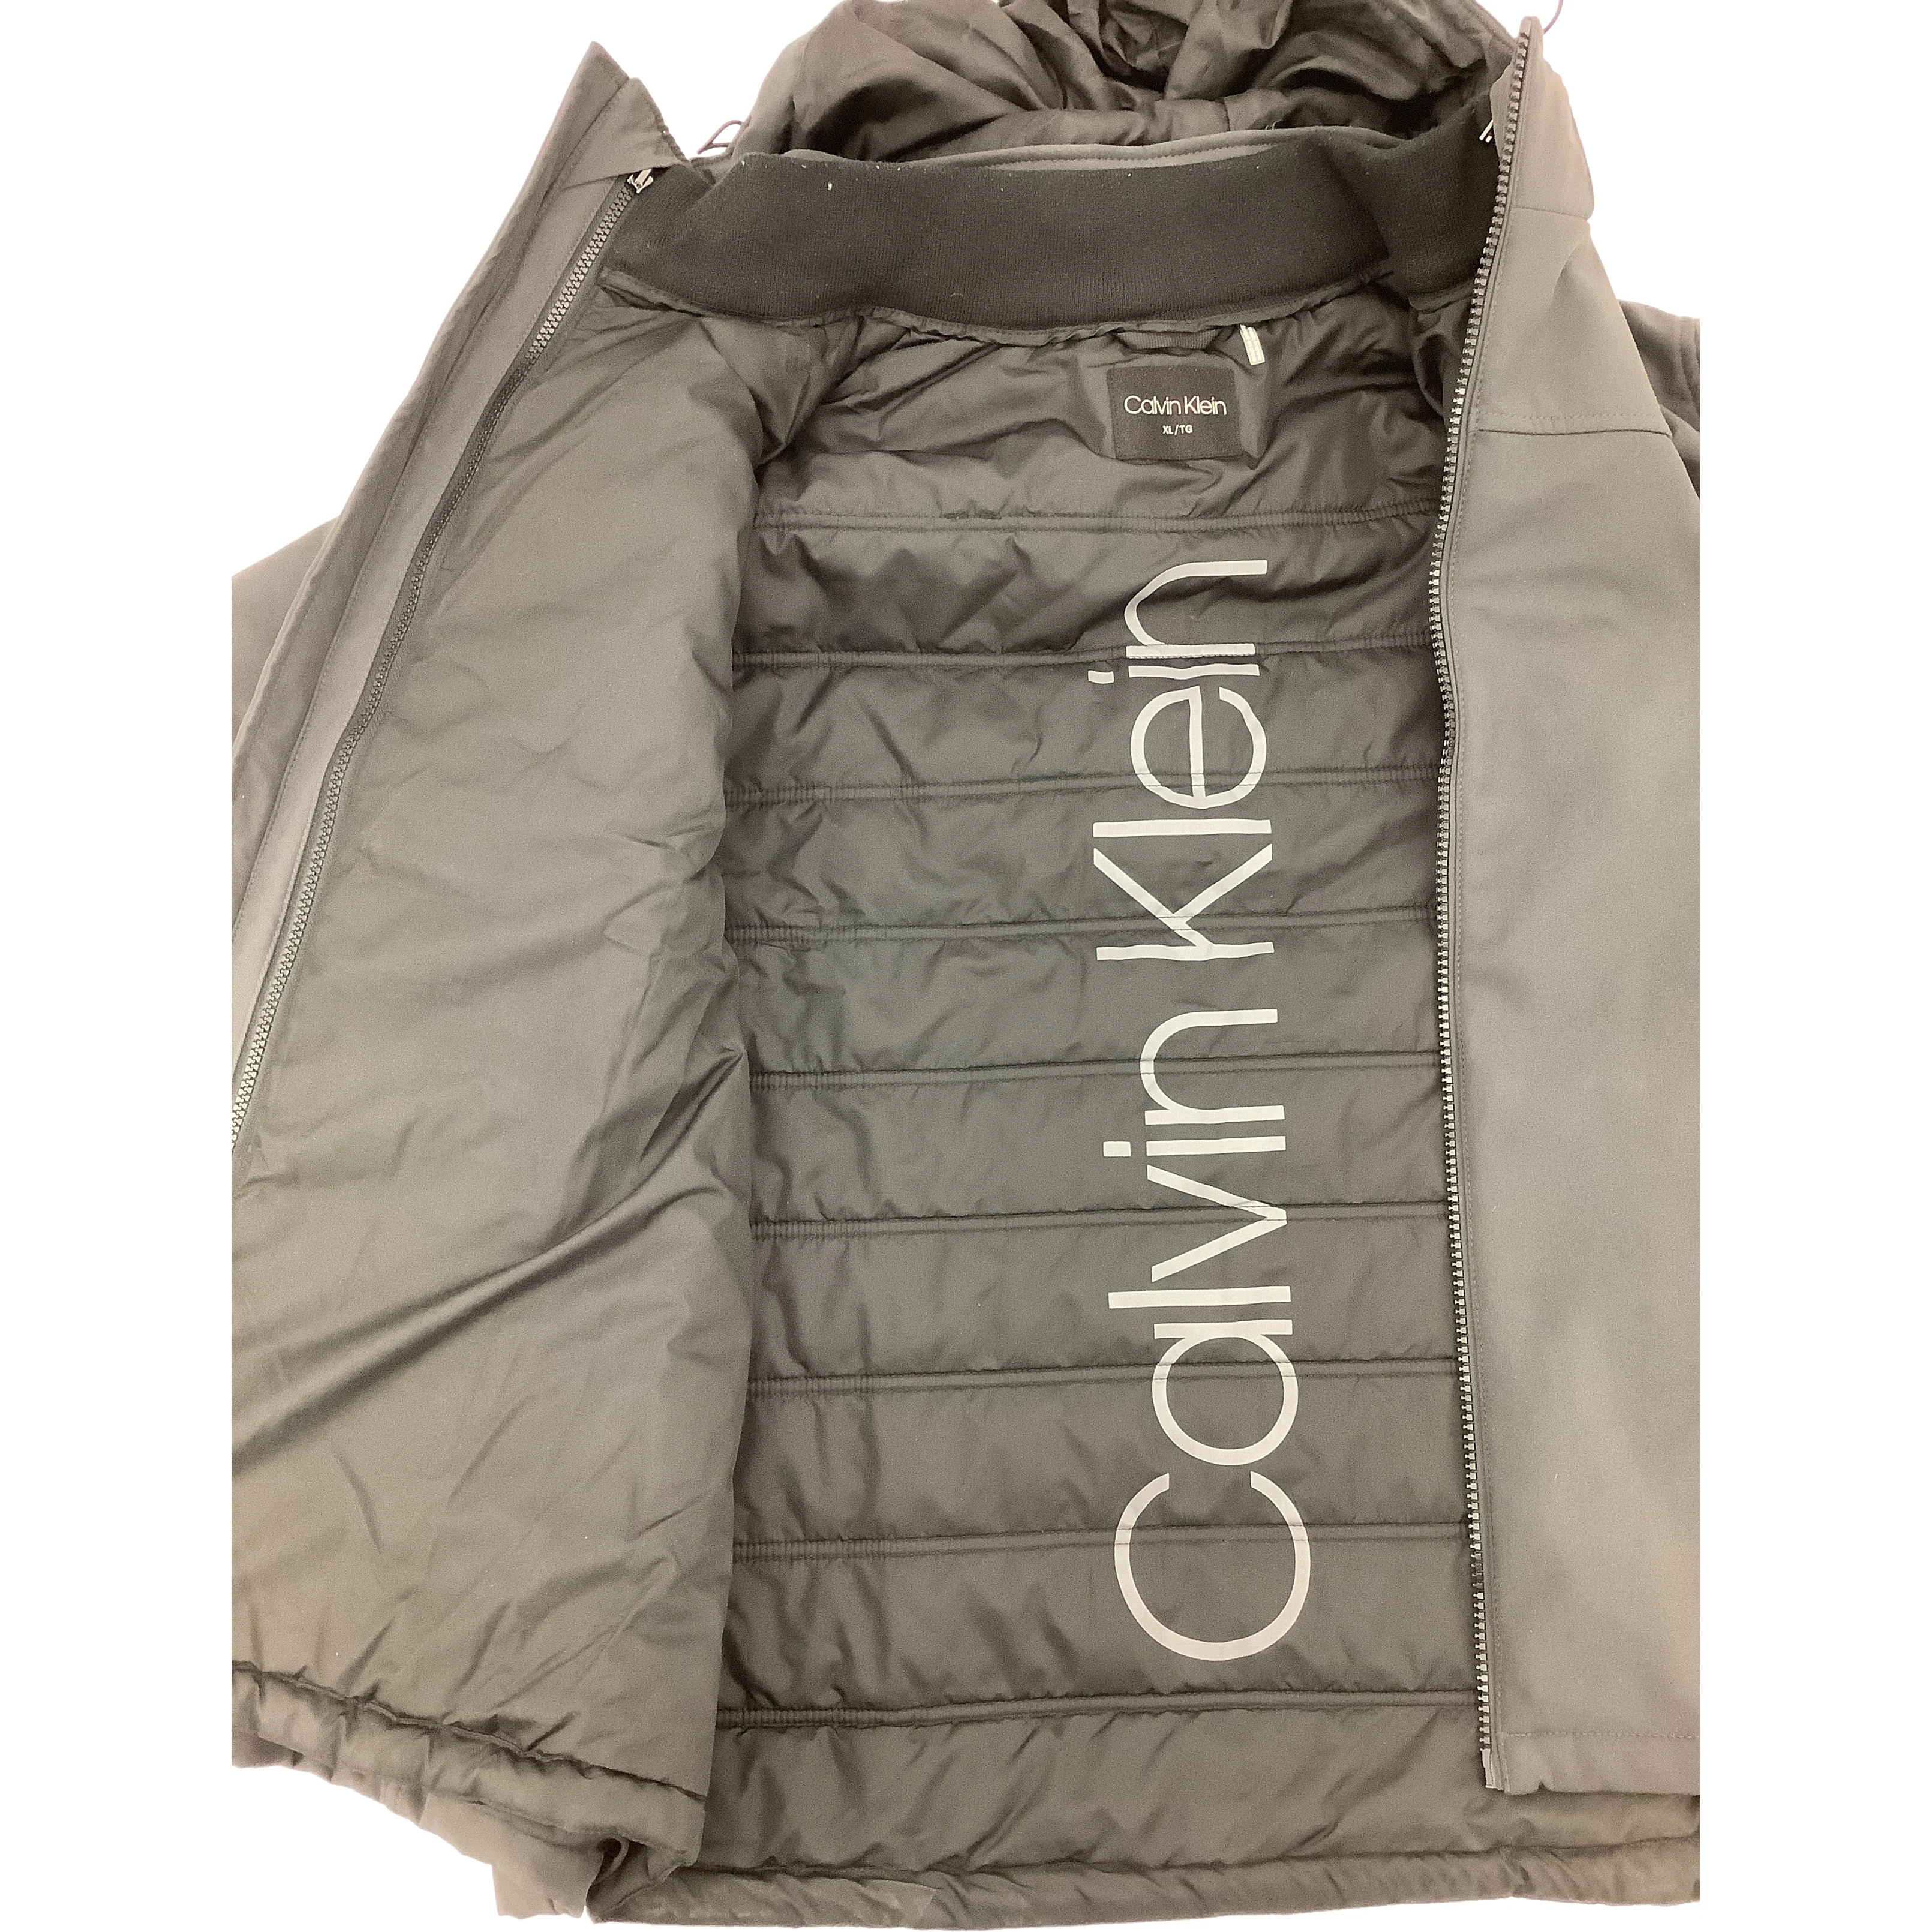 Calvin Klein Men's Winter Jacket / 3-in-1 / Charcoal / Size XL **No Tags**